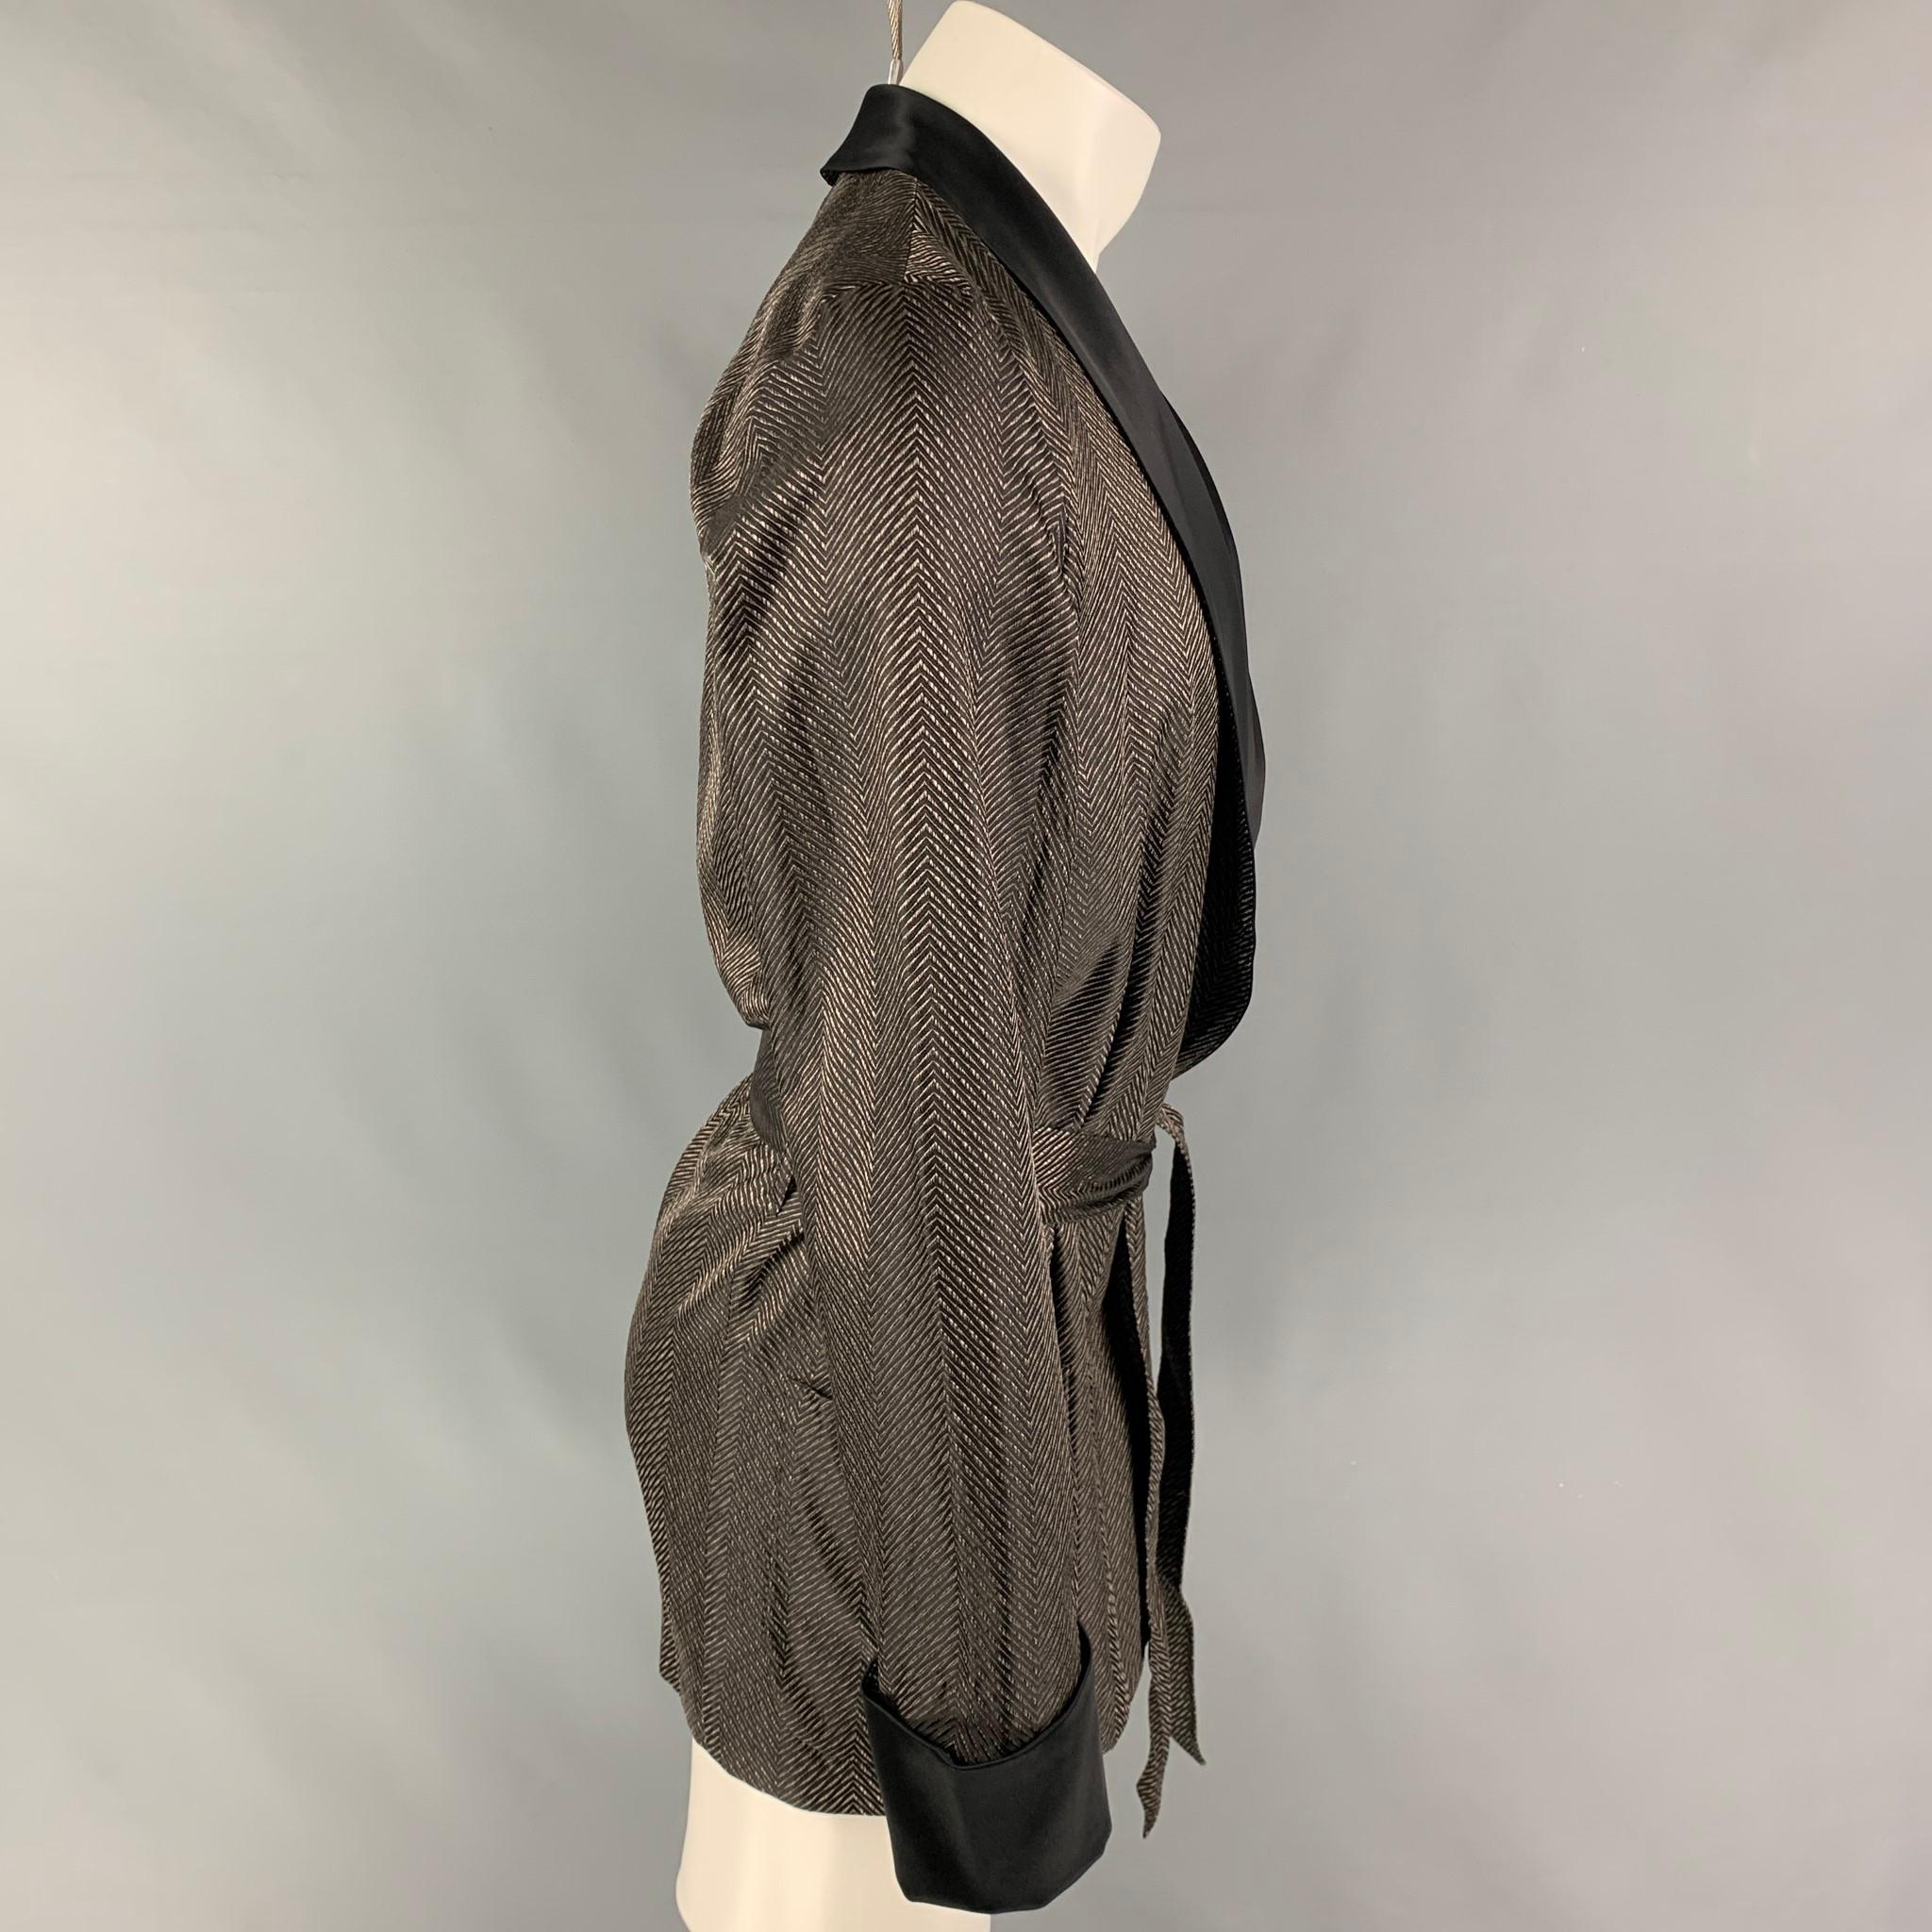 LA PERLA smoking jacket comes in a black & brown jacquard silk featuring a shawl collar, patch pockets, belted, and a open front. Made in Italy. 

Very Good Pre-Owned Condition. Fabric tag removed.
Marked: Size tag removed.

Measurements:

Shoulder: